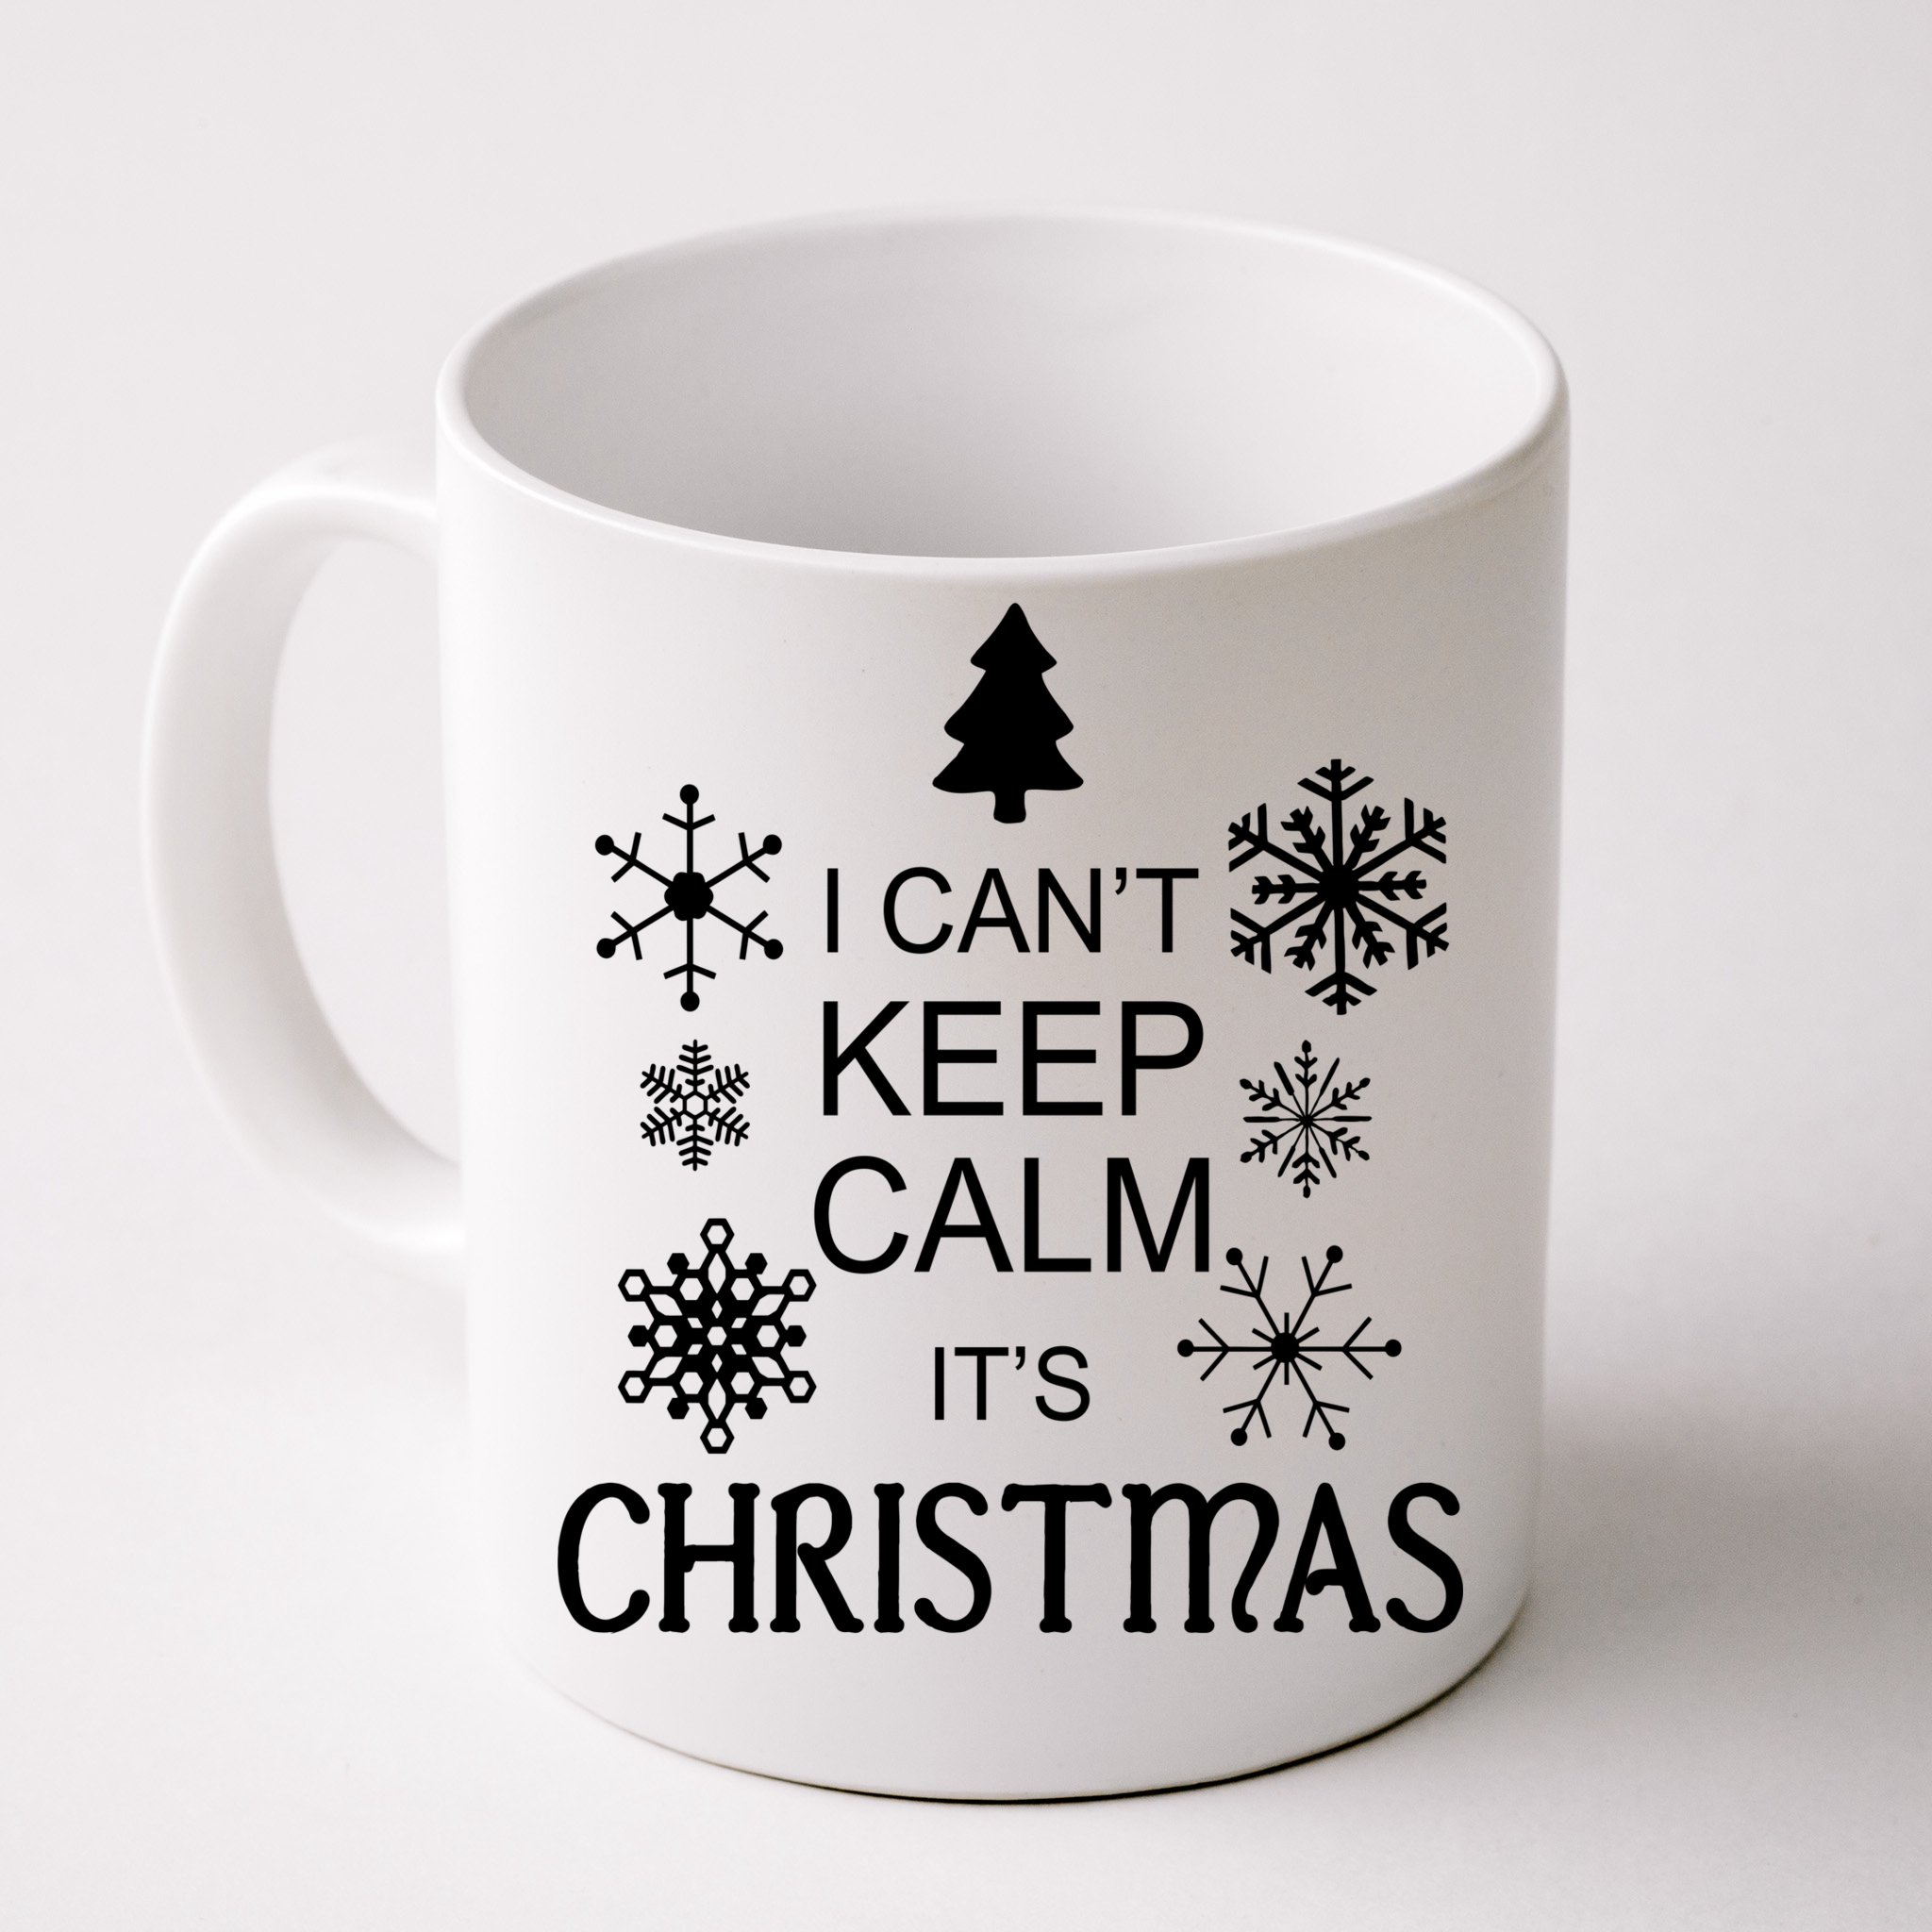 https://images3.teeshirtpalace.com/images/productImages/i-cant-keep-calm-its-christmas--white-cfm-front.jpg